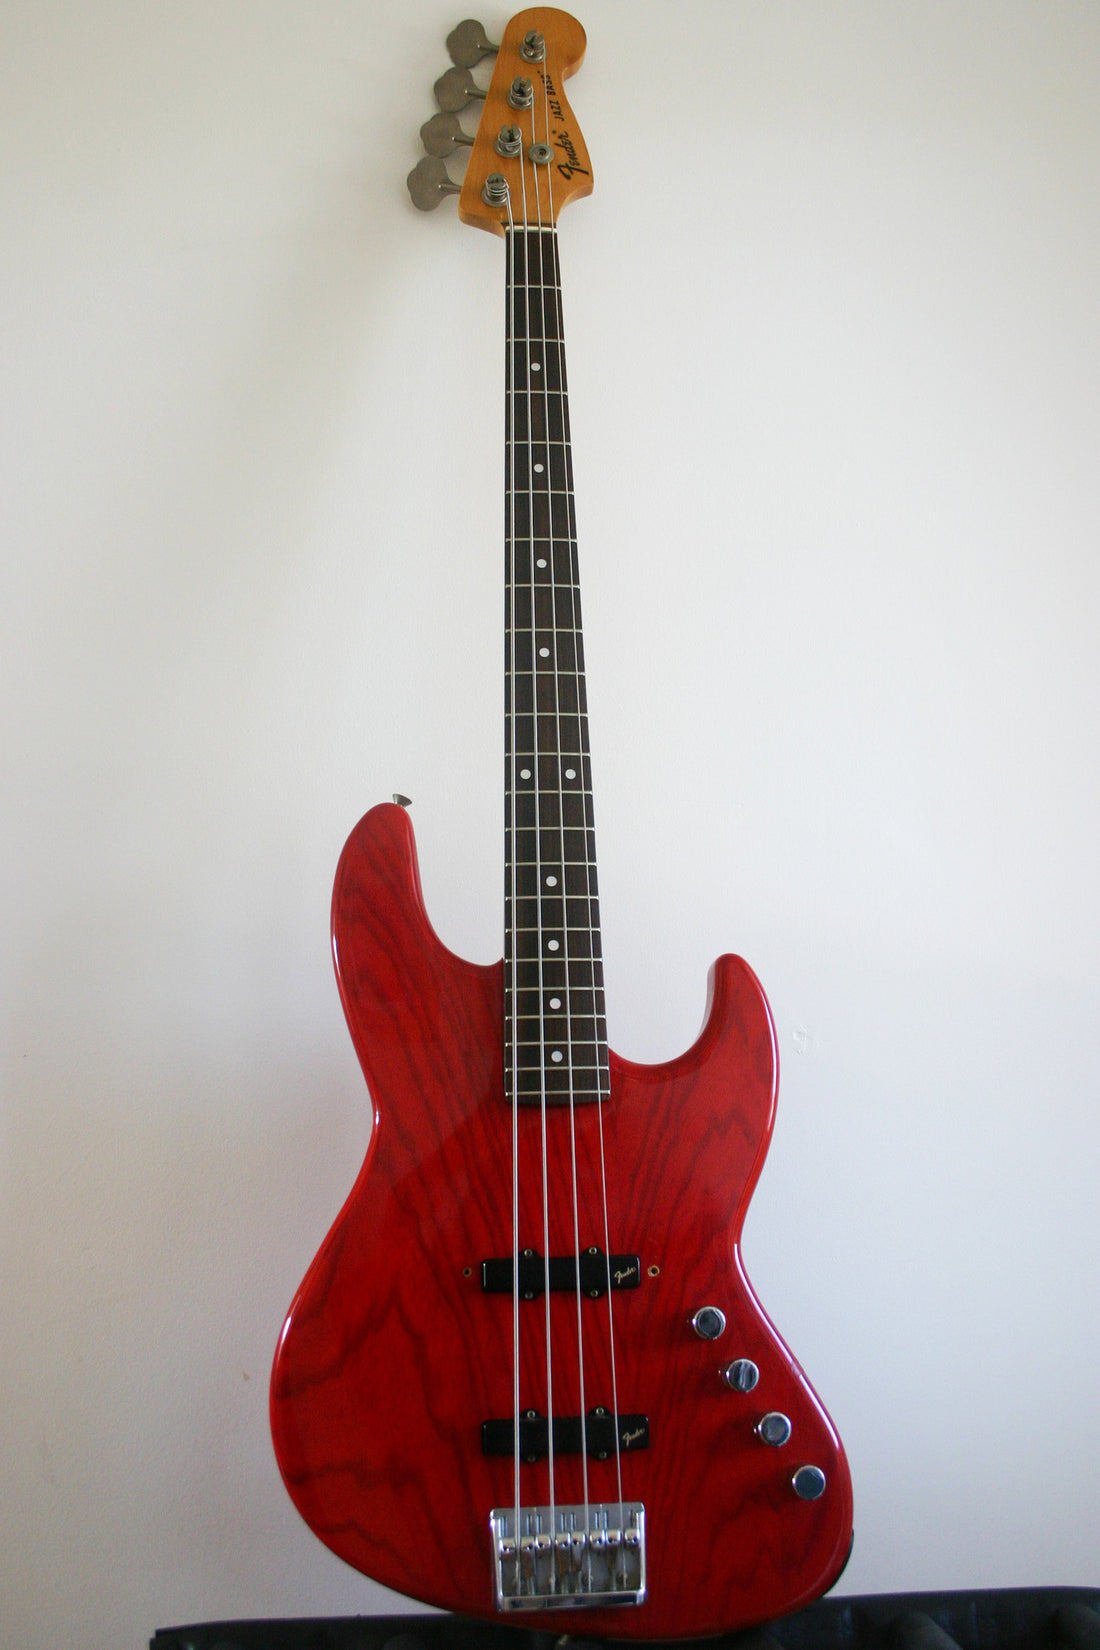 Used Fender Jazz Bass Active Trans Red 1987-88